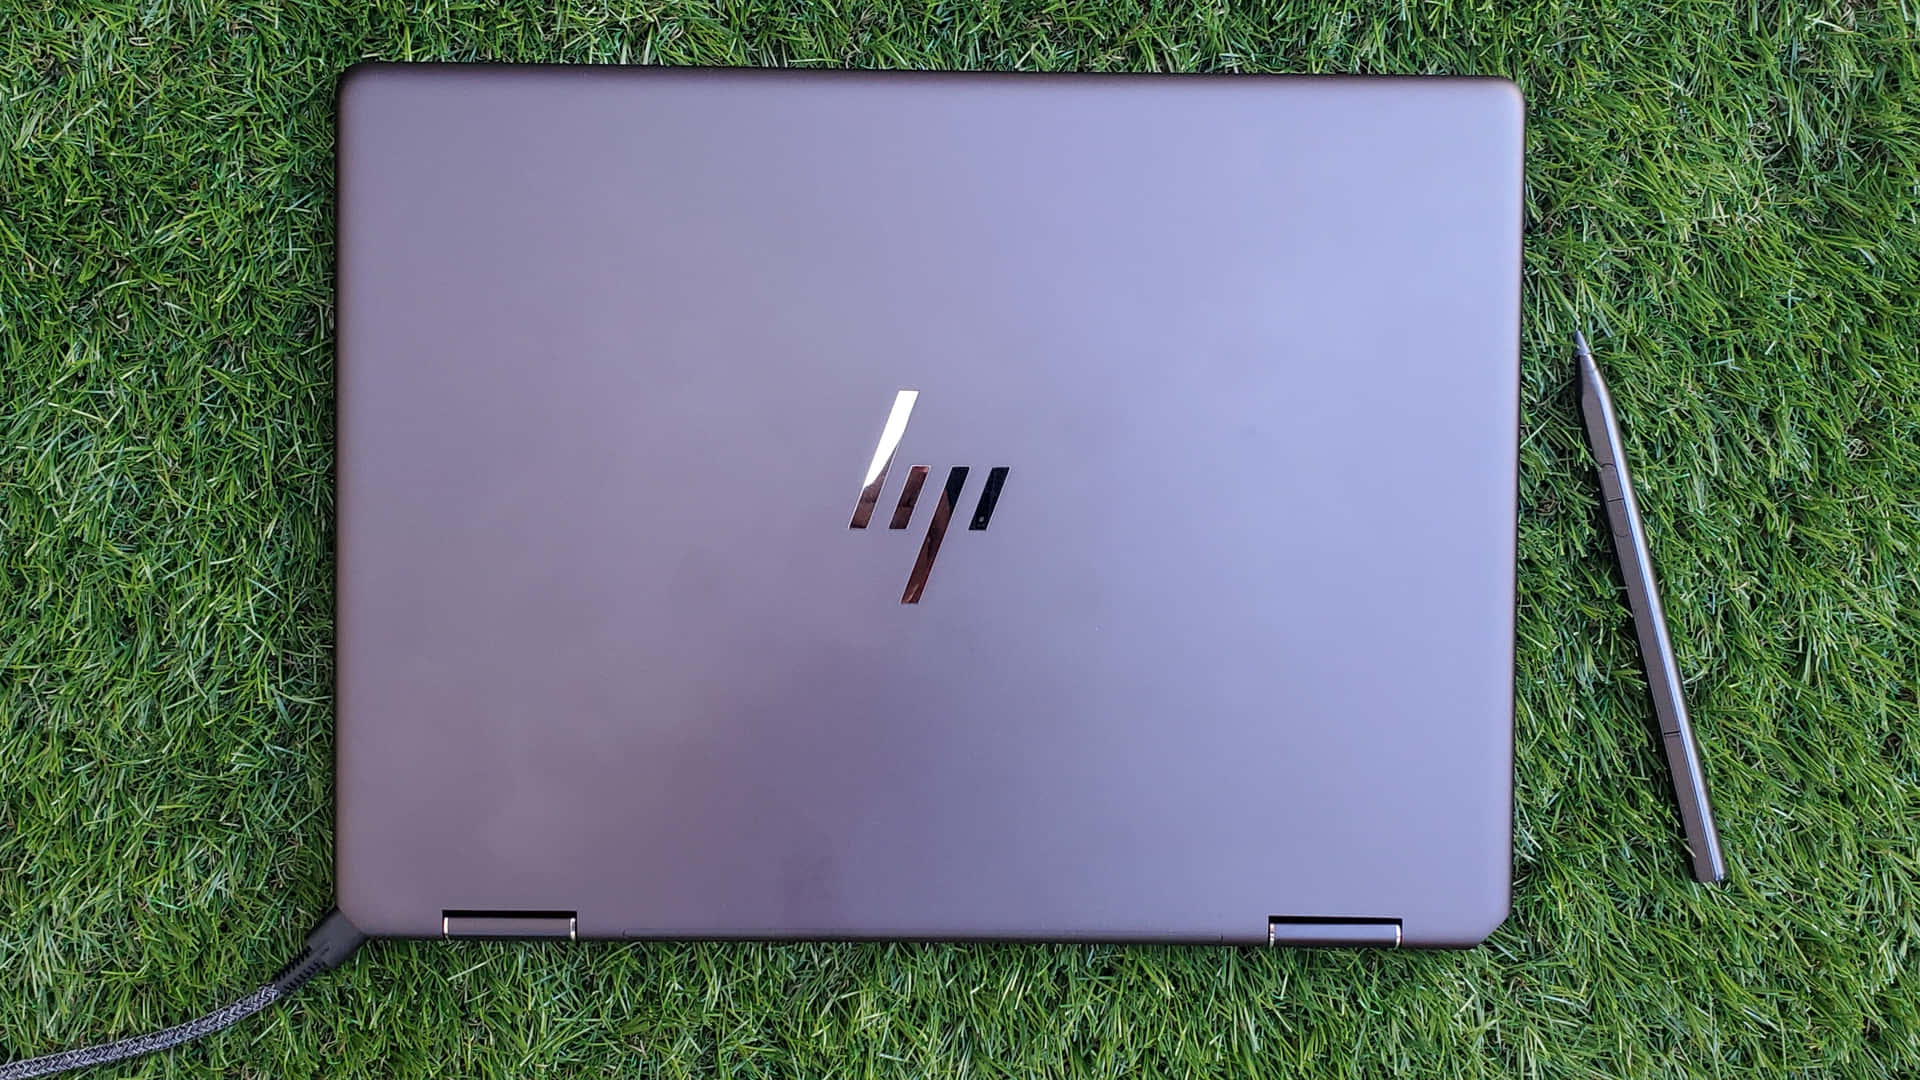 Embrace the power of the HP EliteBook